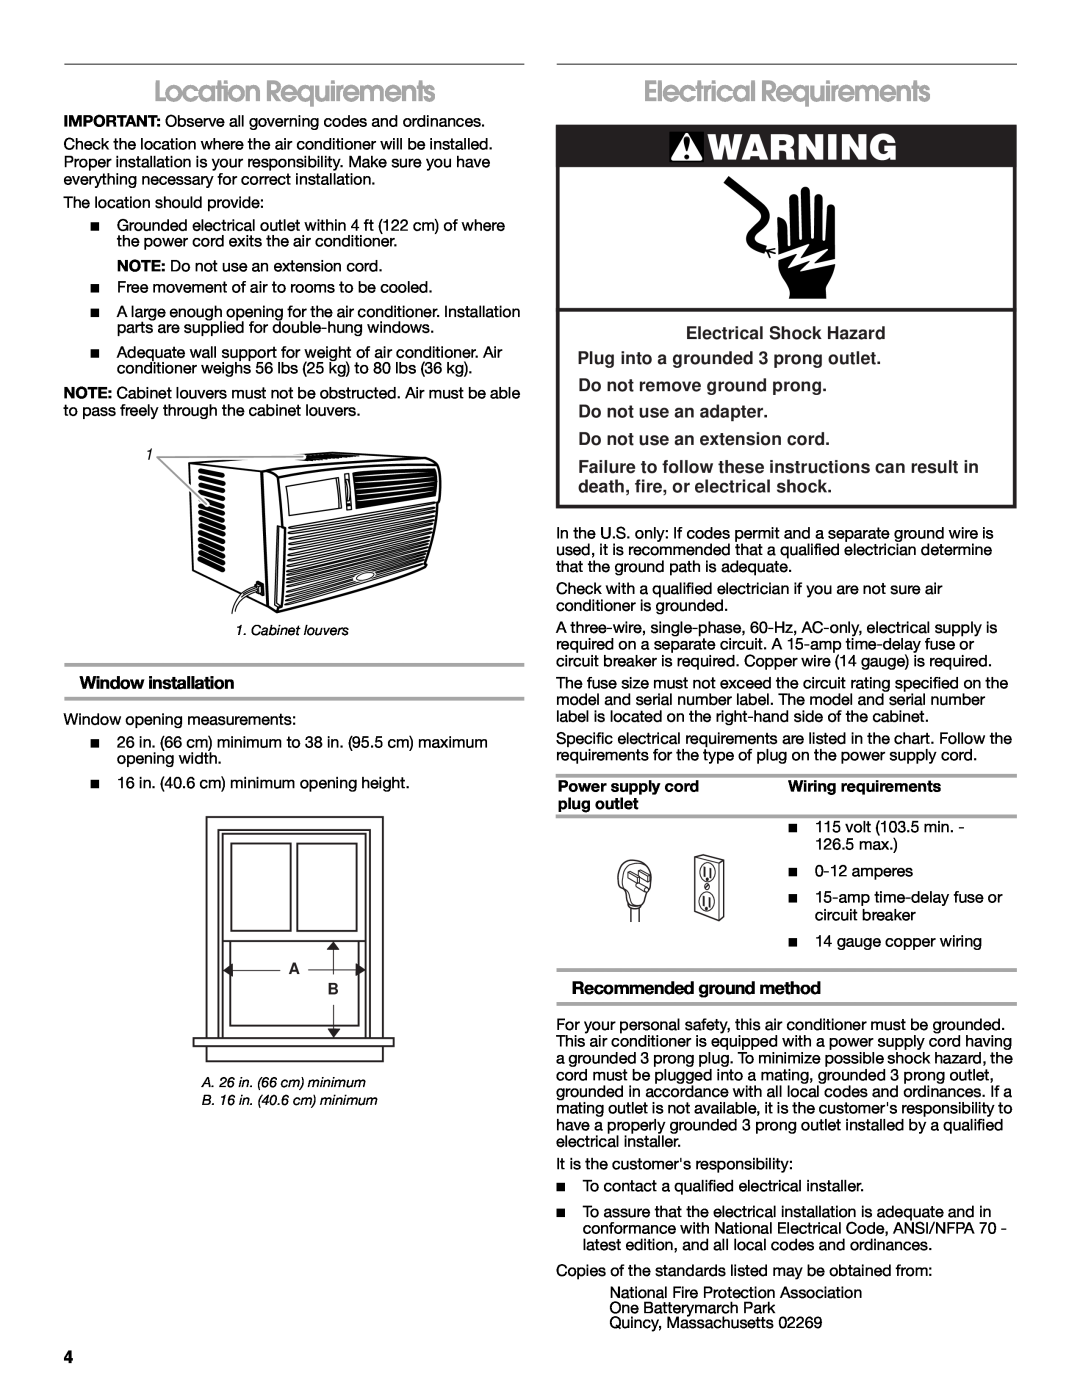 Whirlpool CA10WXP0 manual Location Requirements, Electrical Requirements, Window installation, Electrical Shock Hazard 